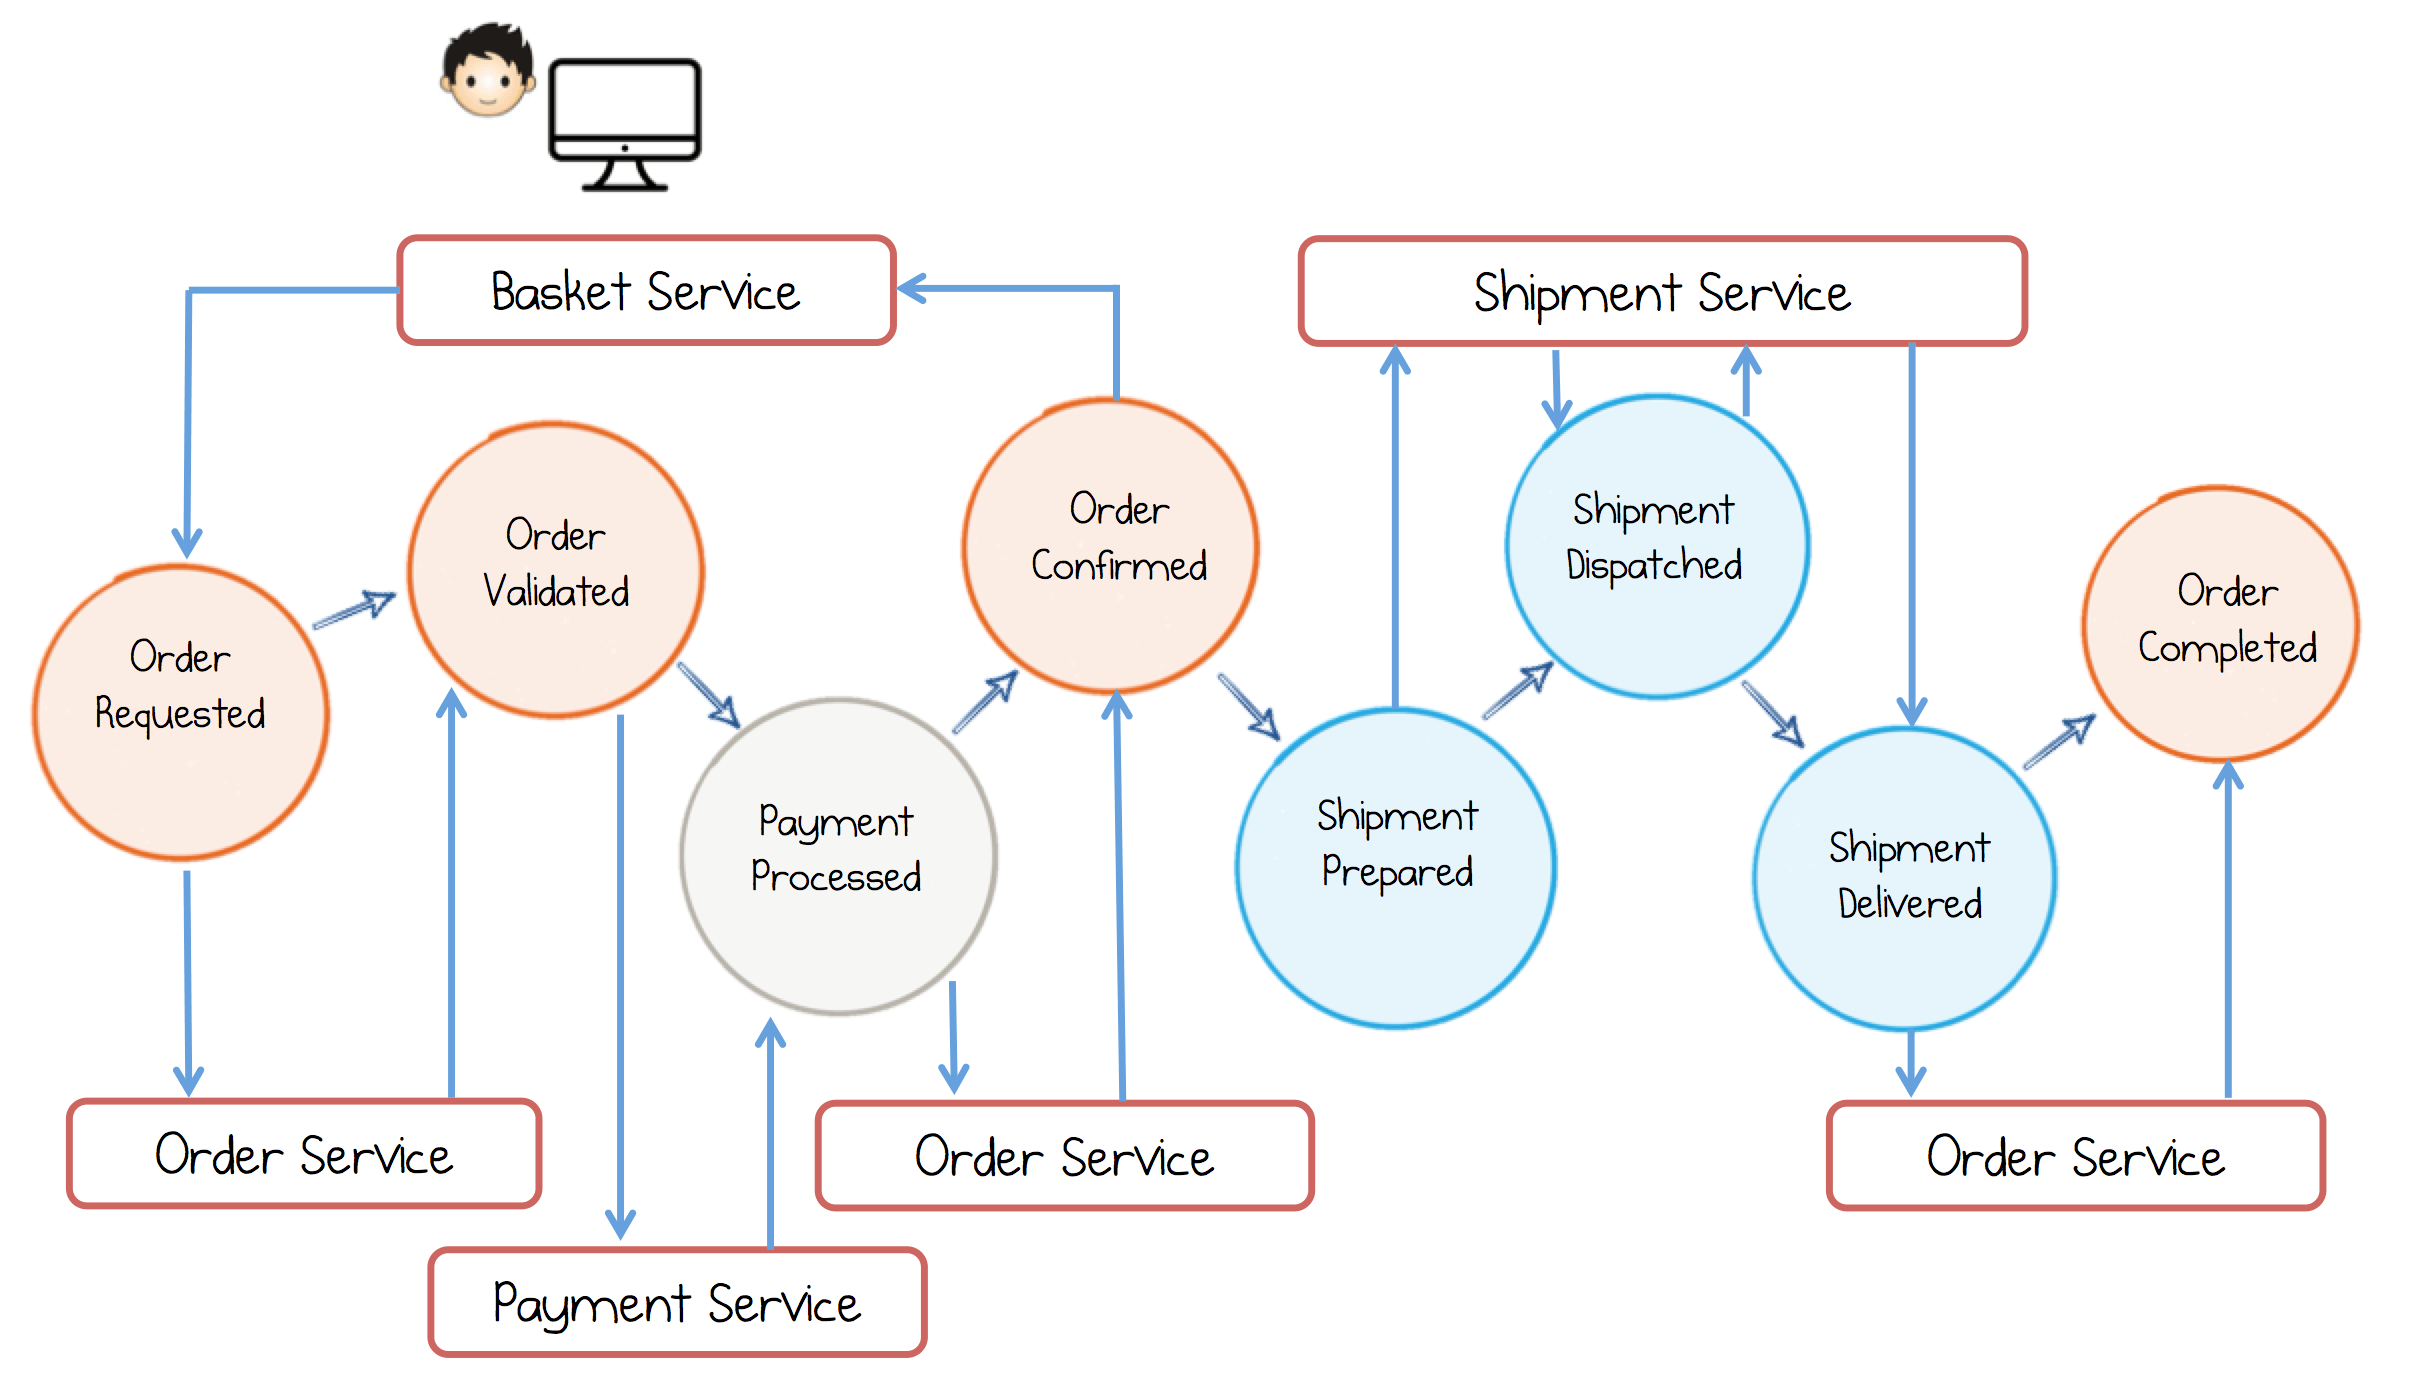 Build Services on a Backbone of Events